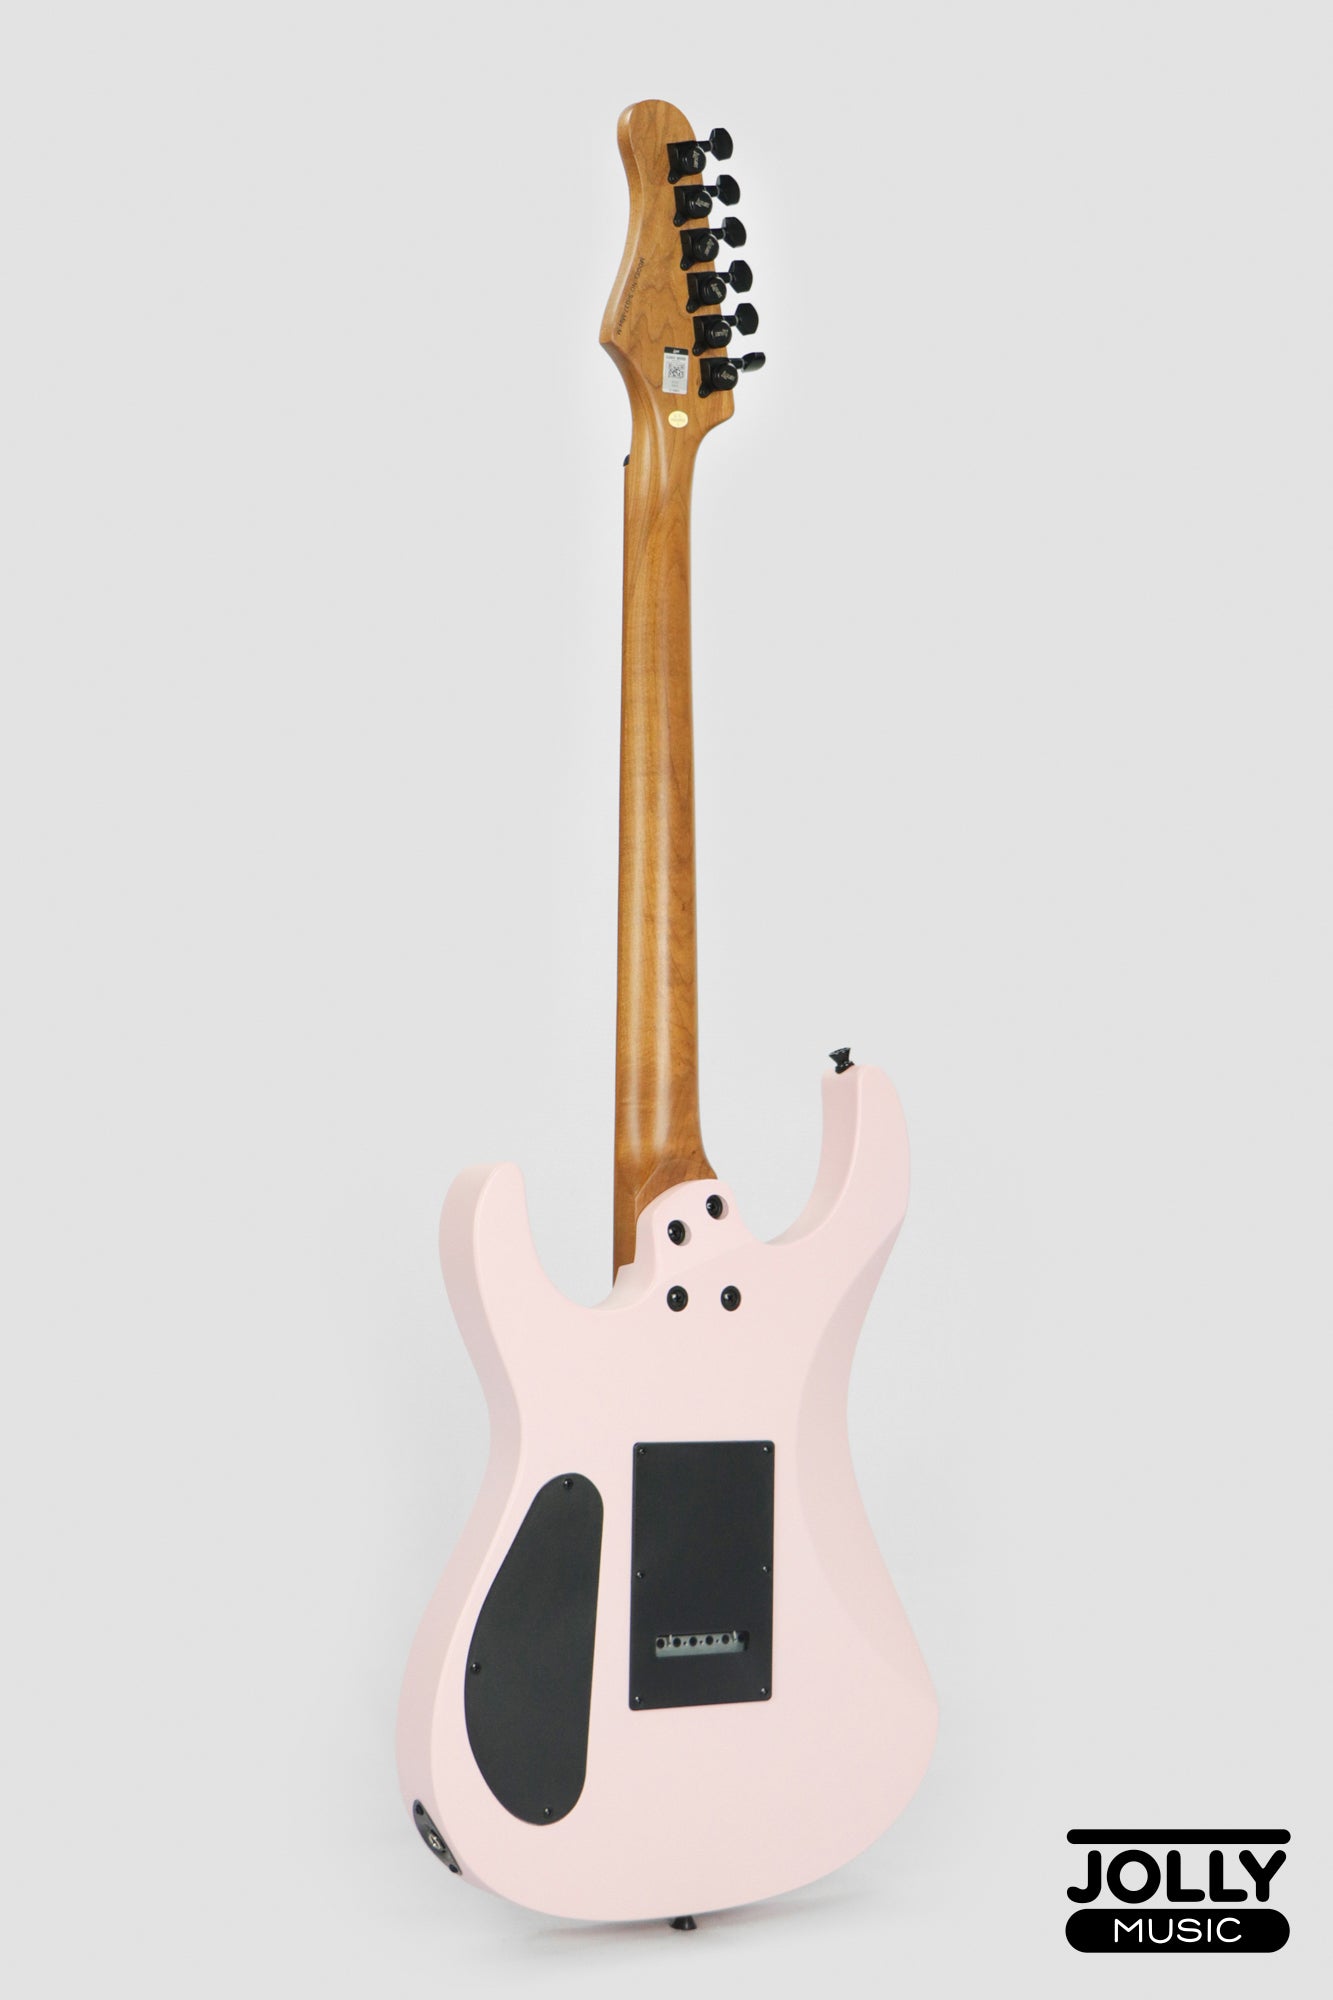 Luxars S-G37-MAX-S Superstrat High Grade Electric Guitar - Pink